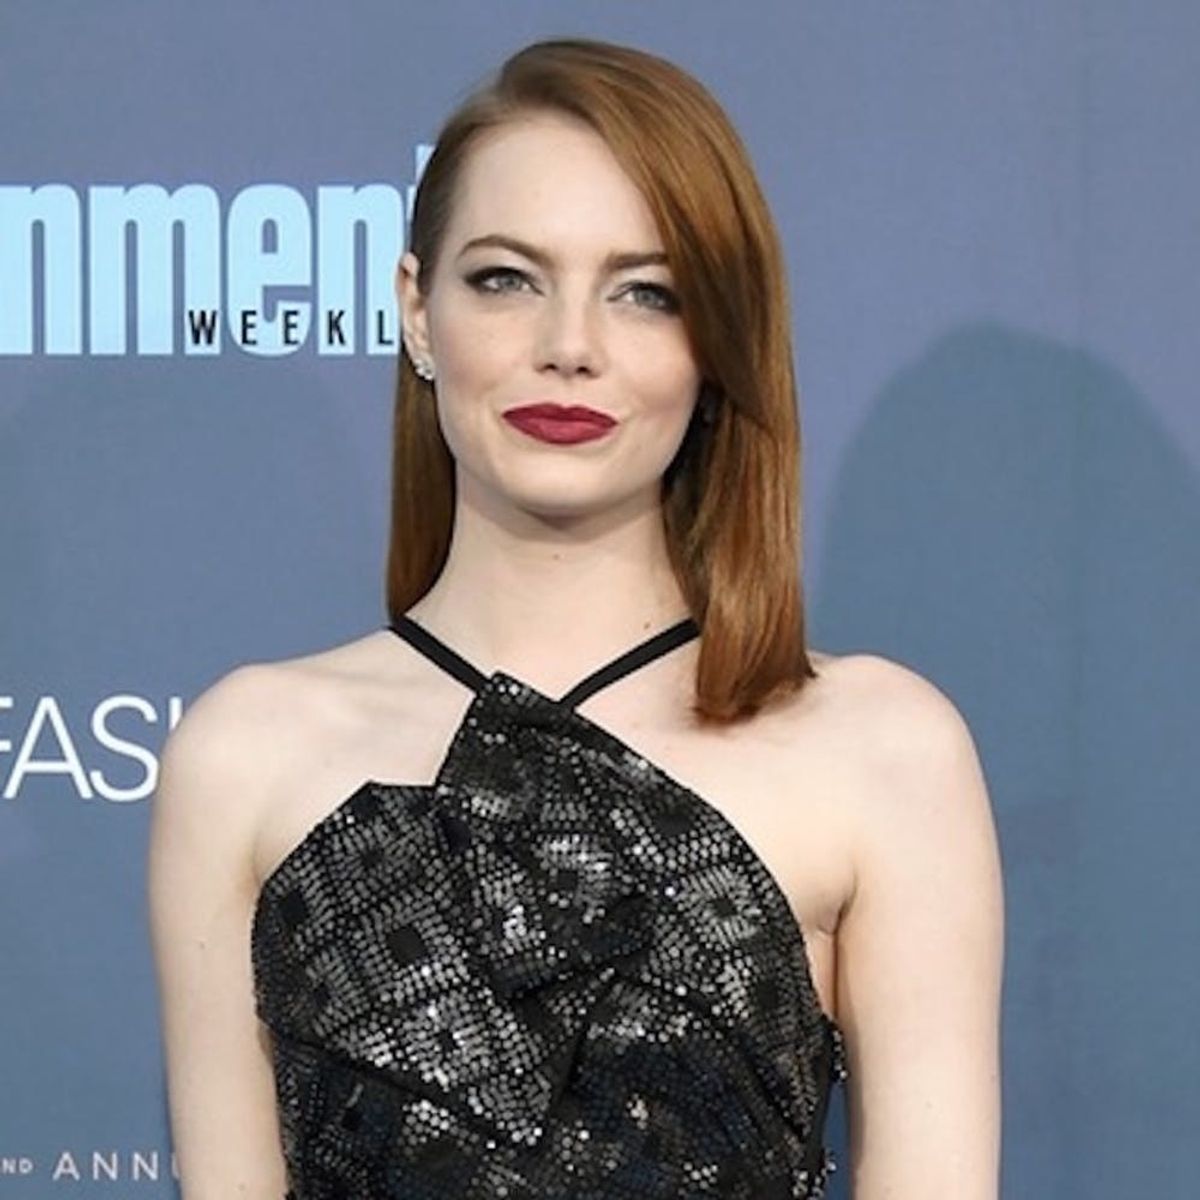 Here’s What Actresses Are Most Likely to Wear on the Red Carpet This Awards Season